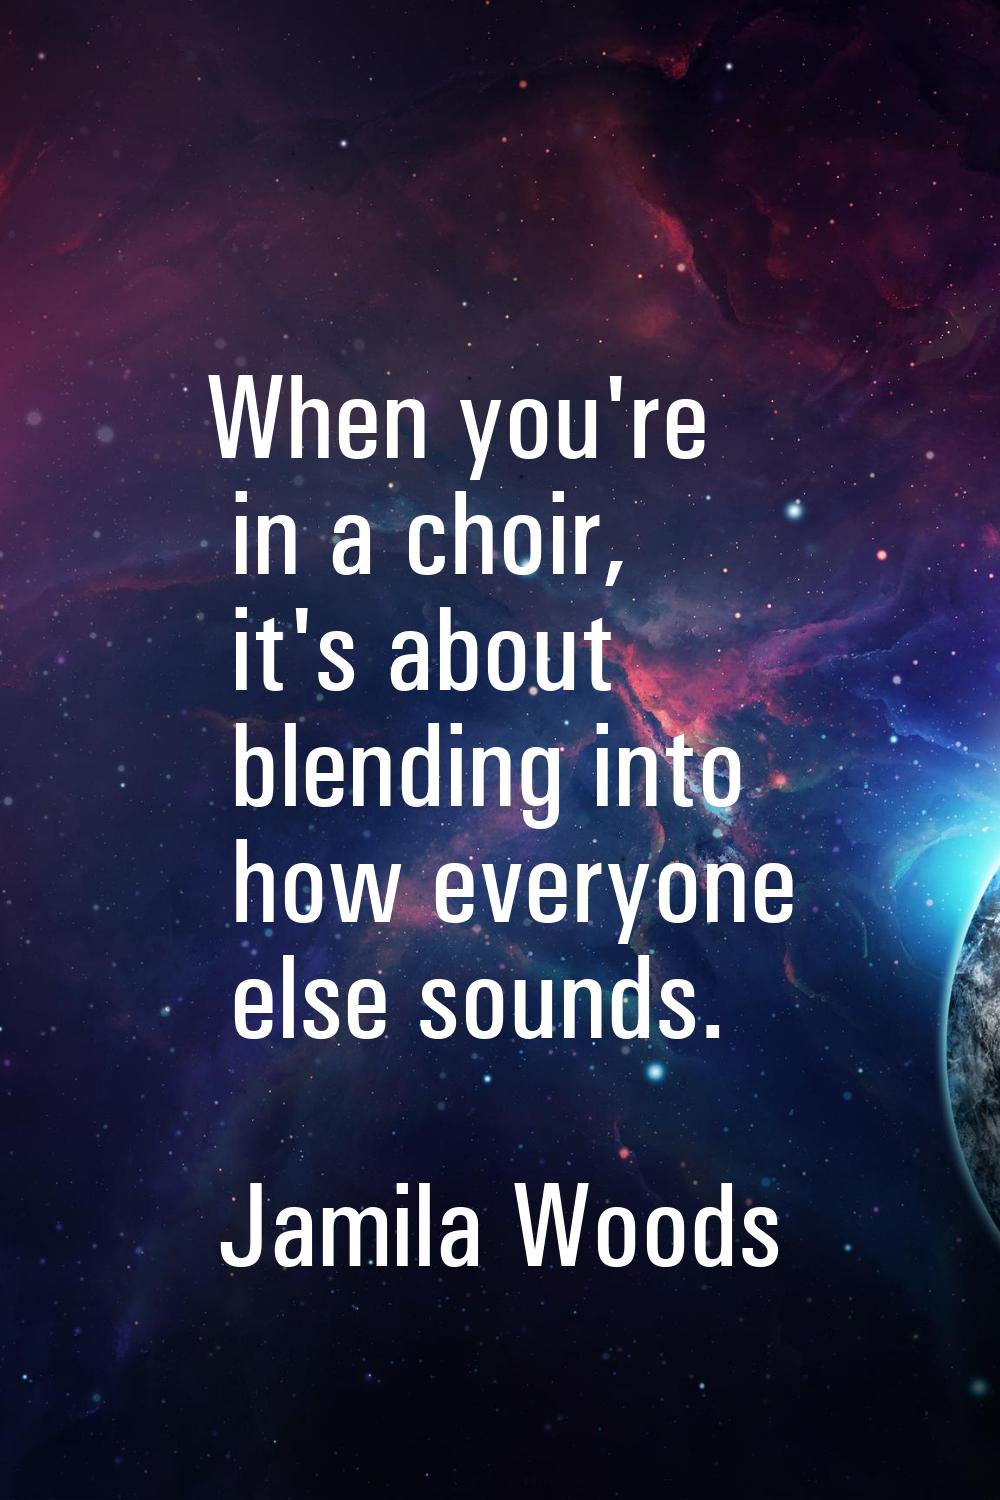 When you're in a choir, it's about blending into how everyone else sounds.